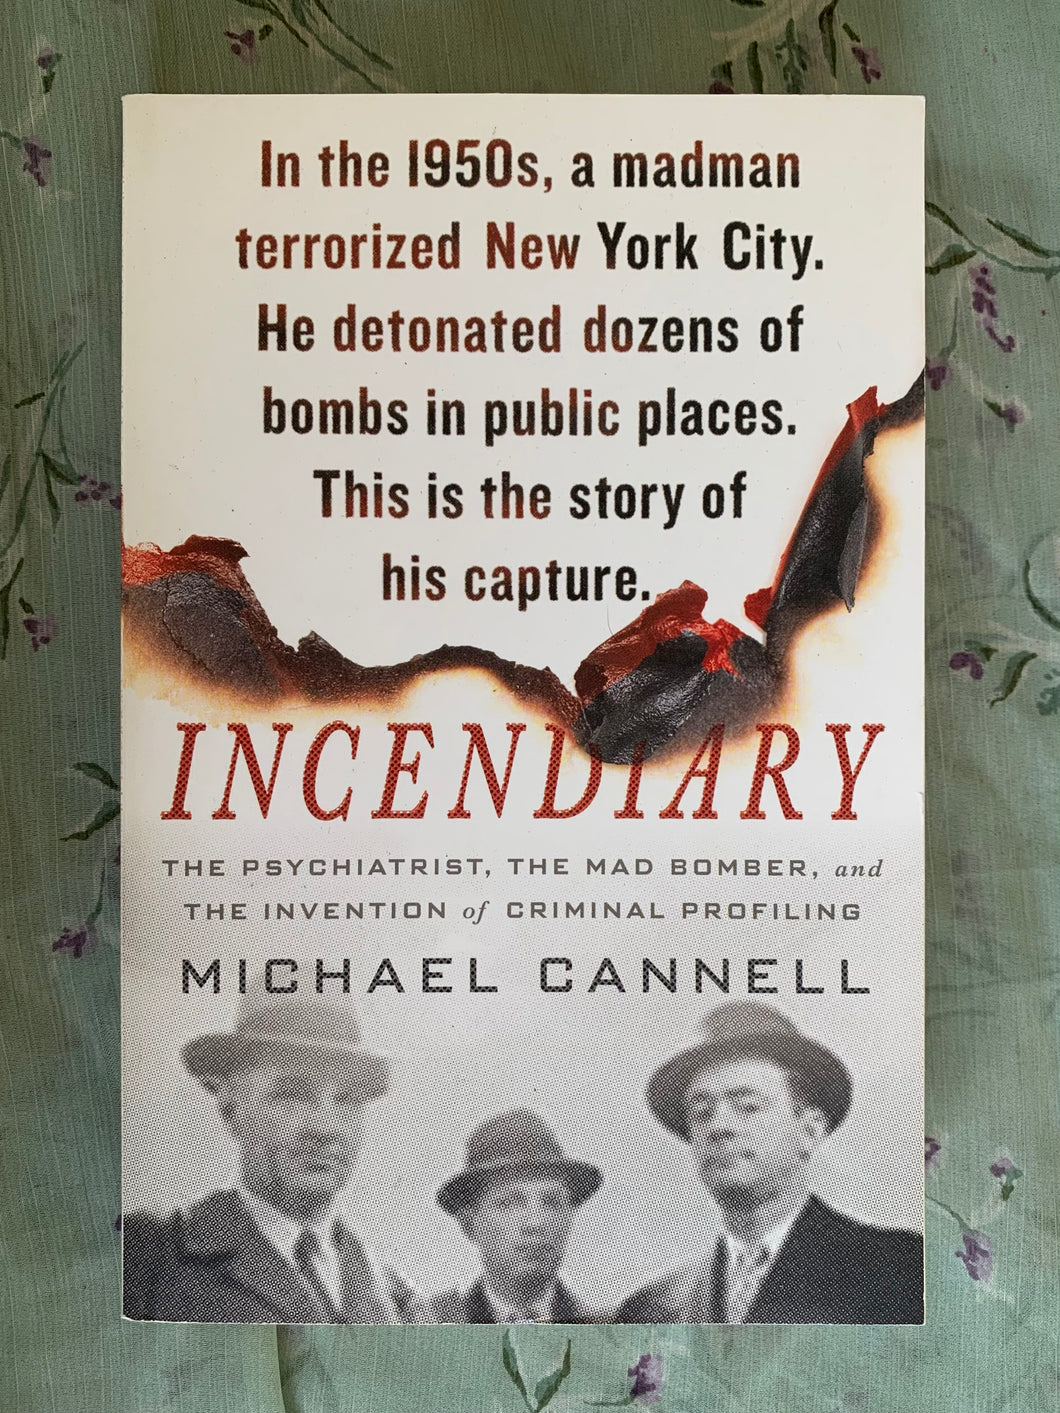 Incendiary: The Psychiatrist, the Mad Bomber, and the Invention of Criminal Profiling